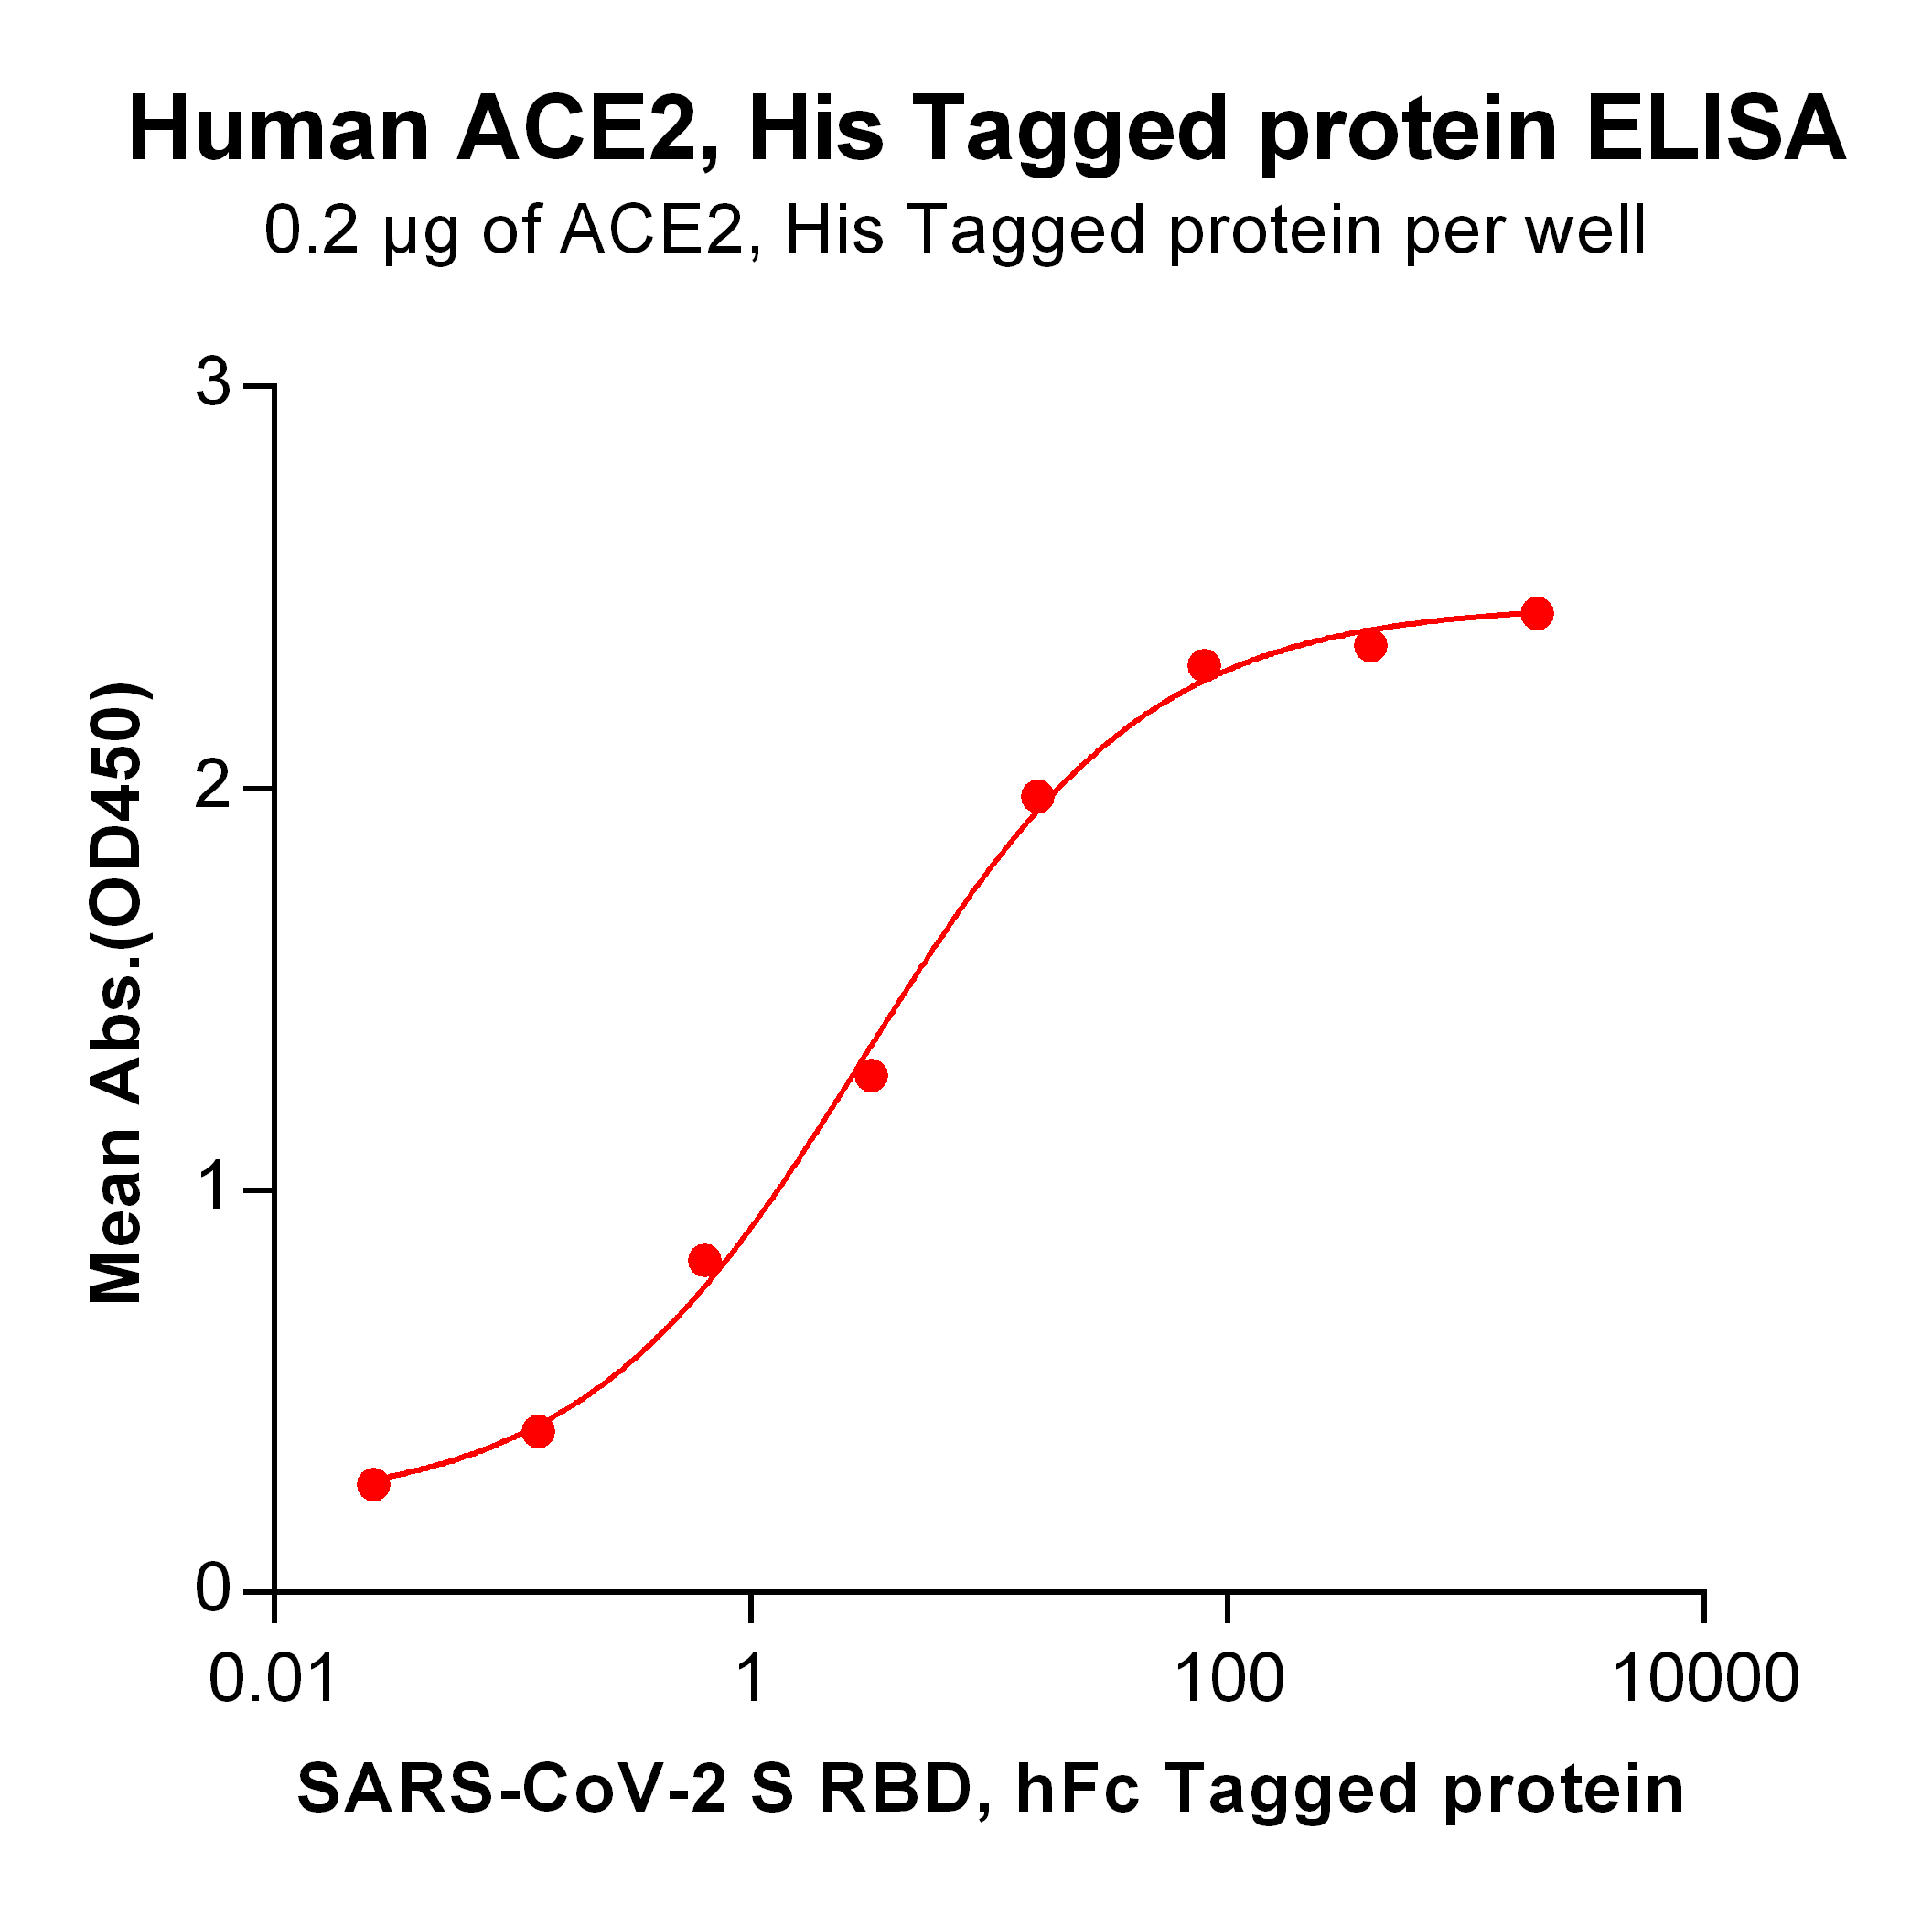 PME100490-His-ACE2-ELISA-Fig2.png